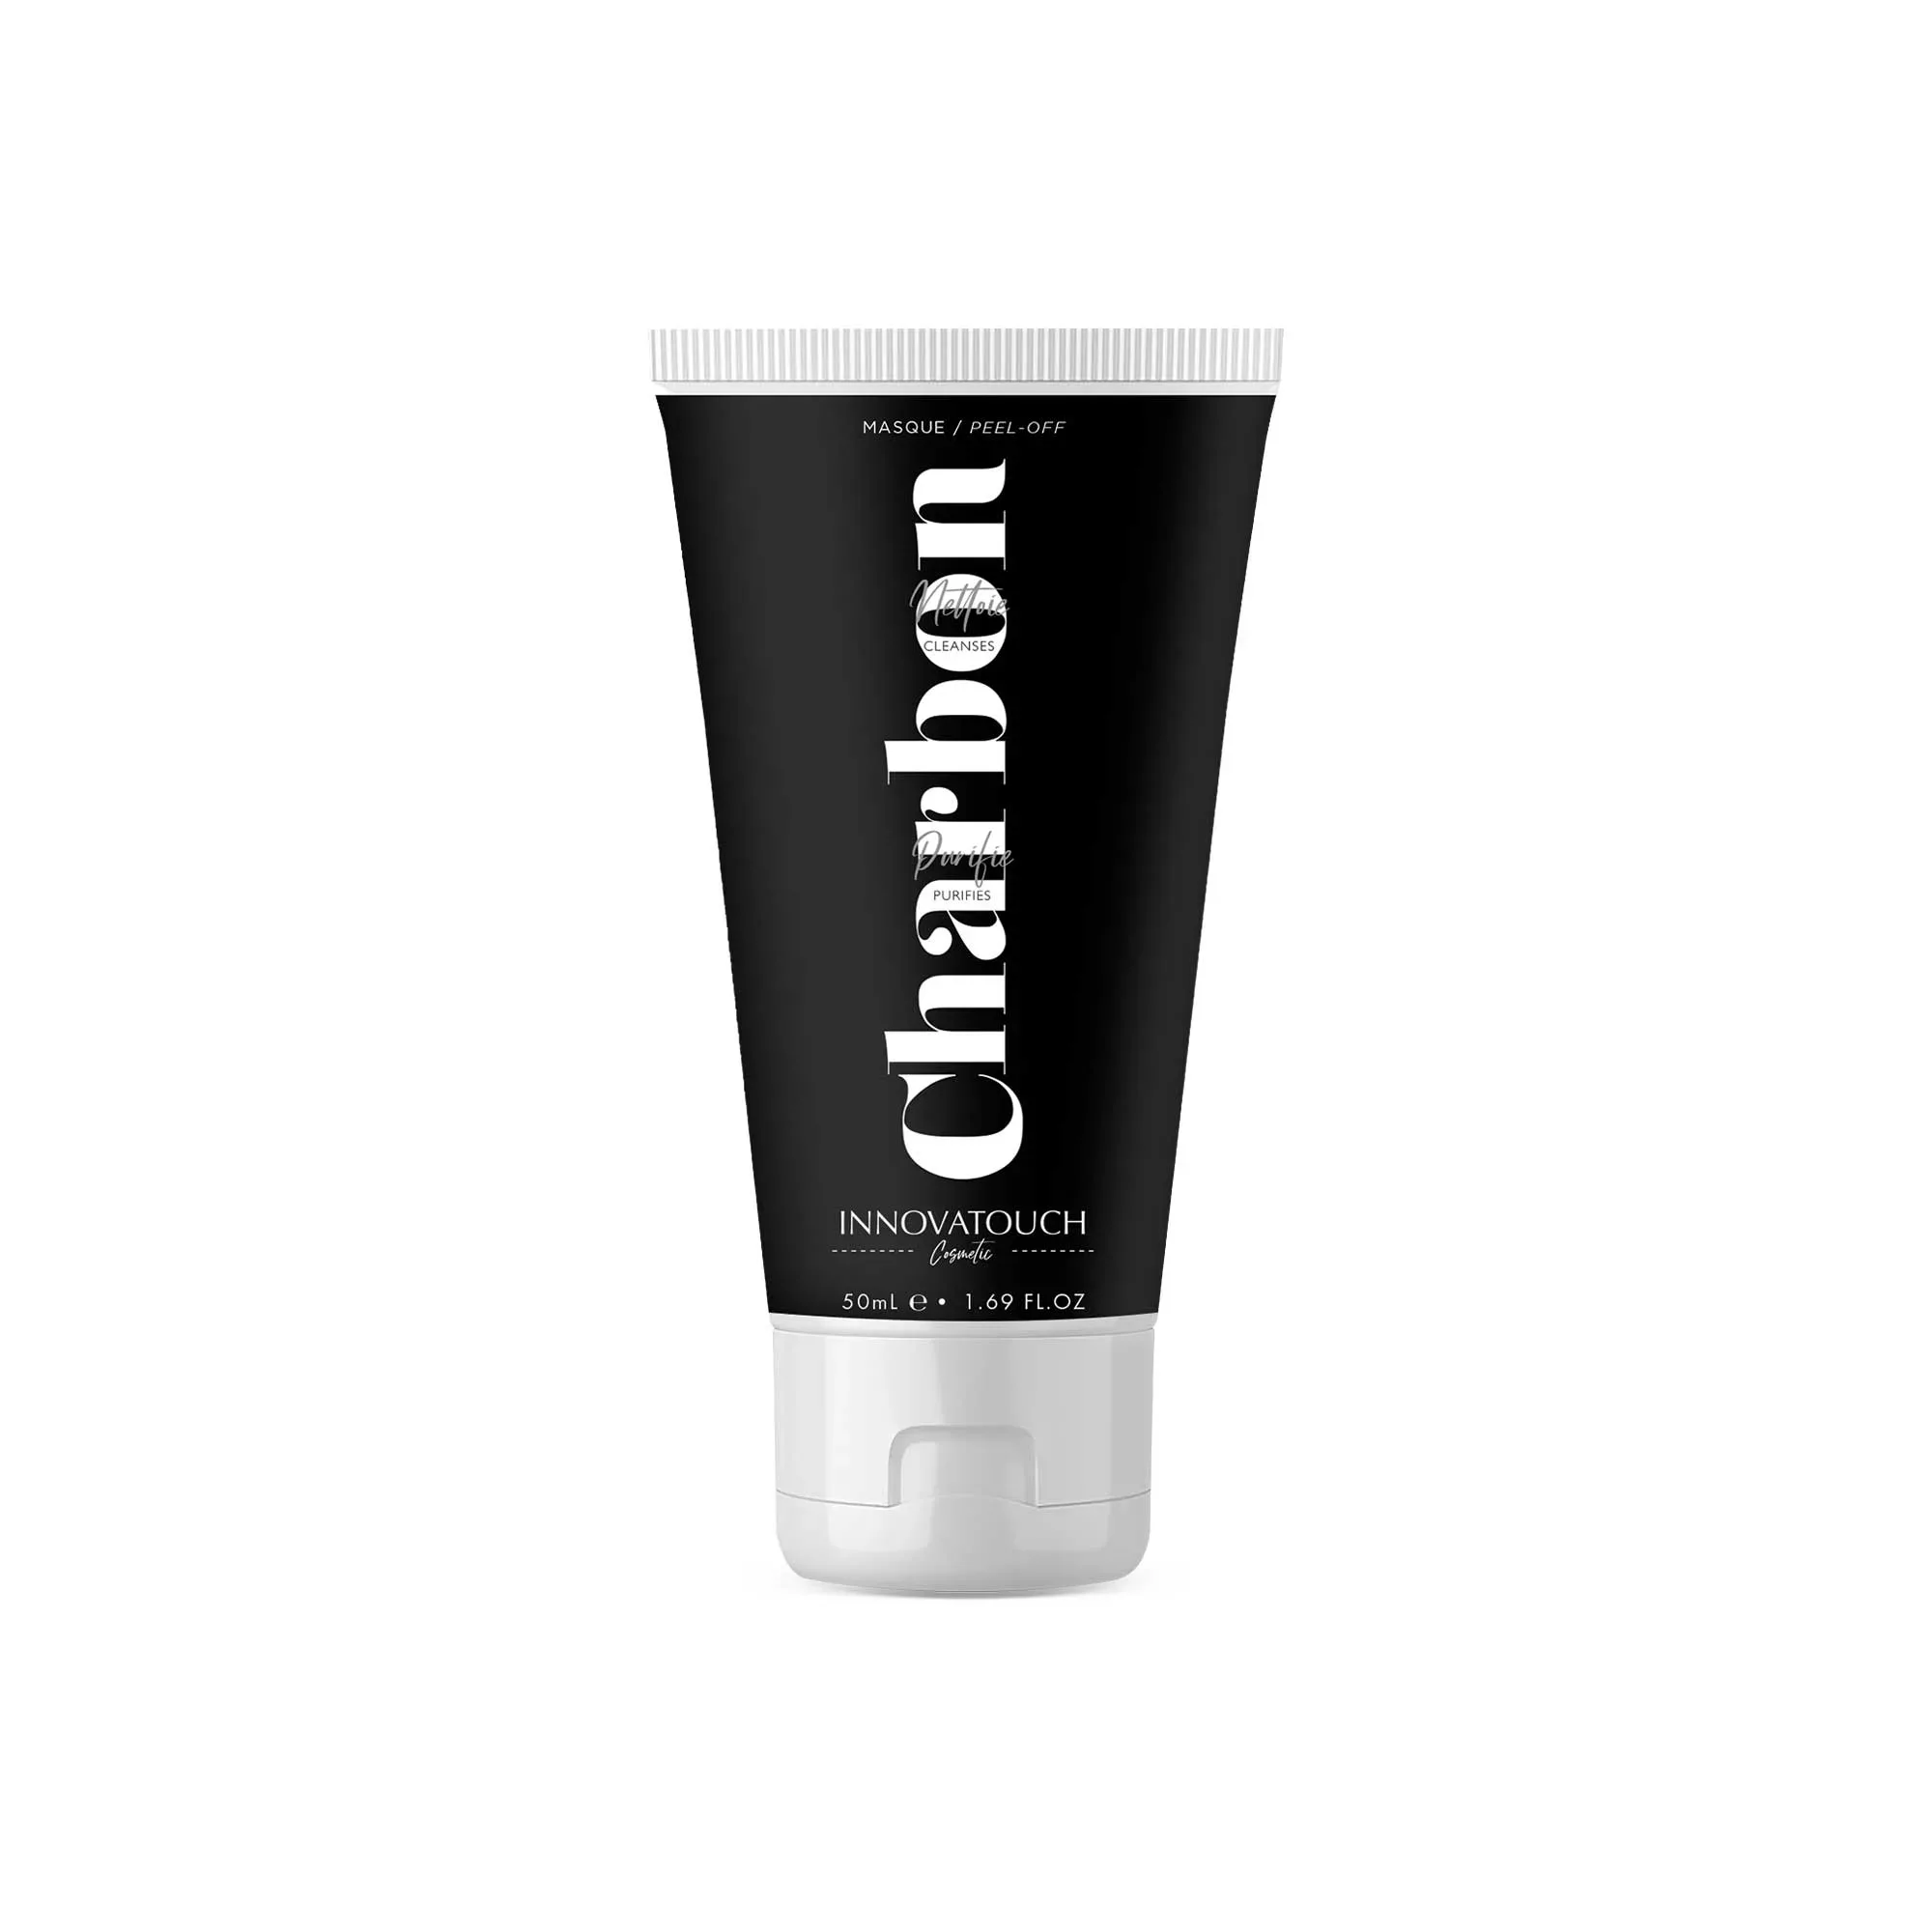 masque peel-off charbon 50ml d'innovatouch cosmetic.